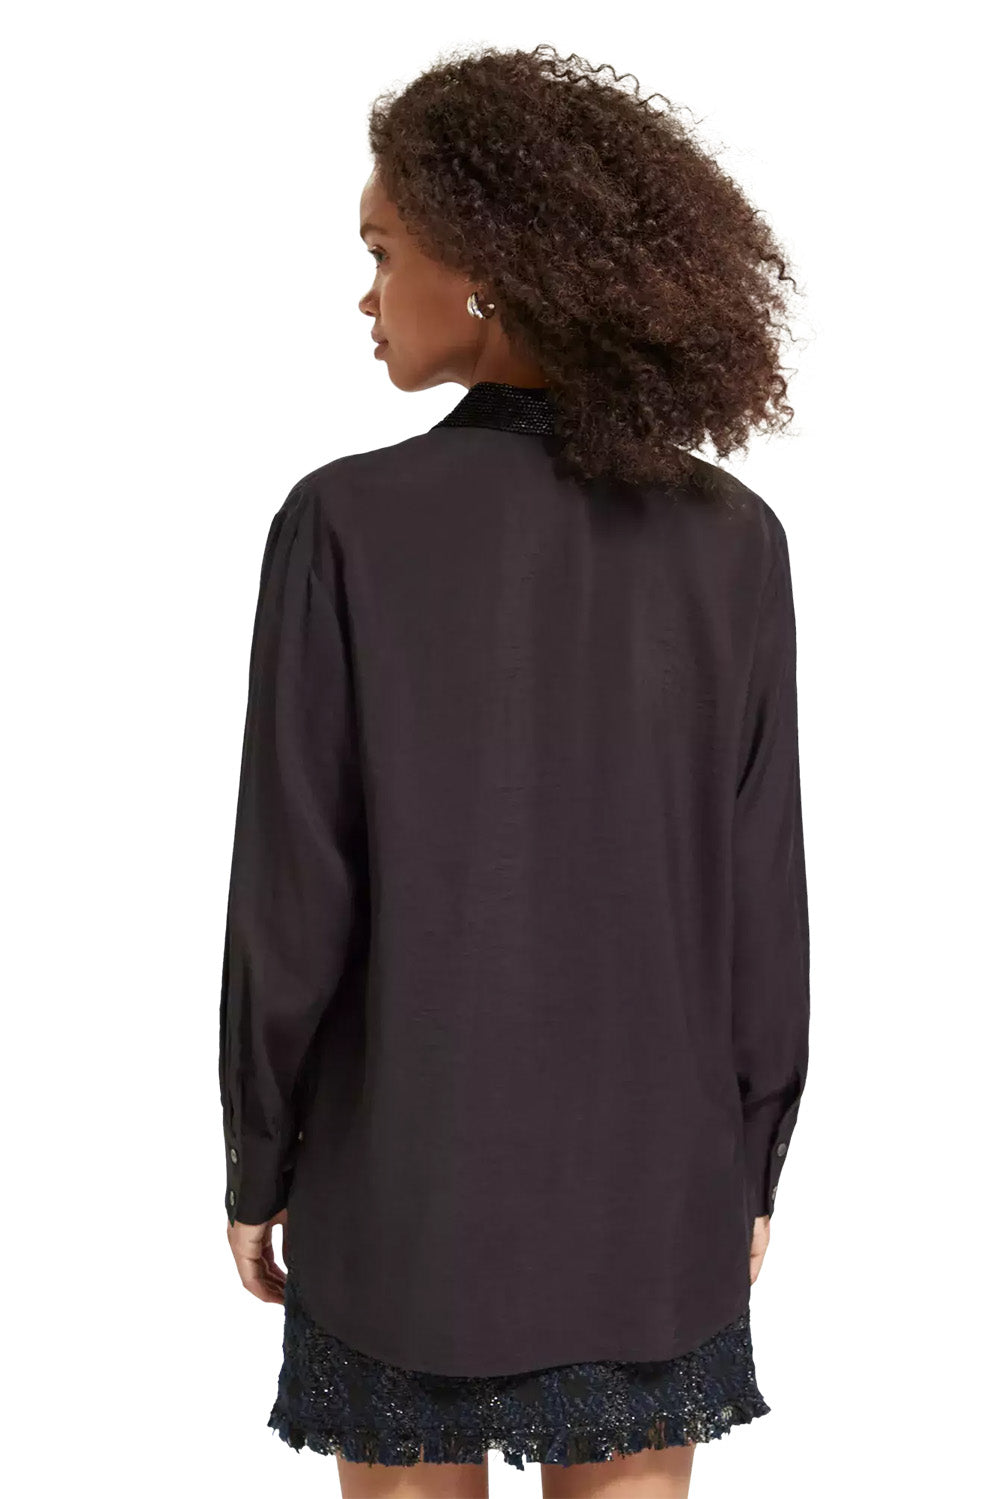 Scotch & Soda - Beaded Relaxed Fit Shirt - Evening Black - Back